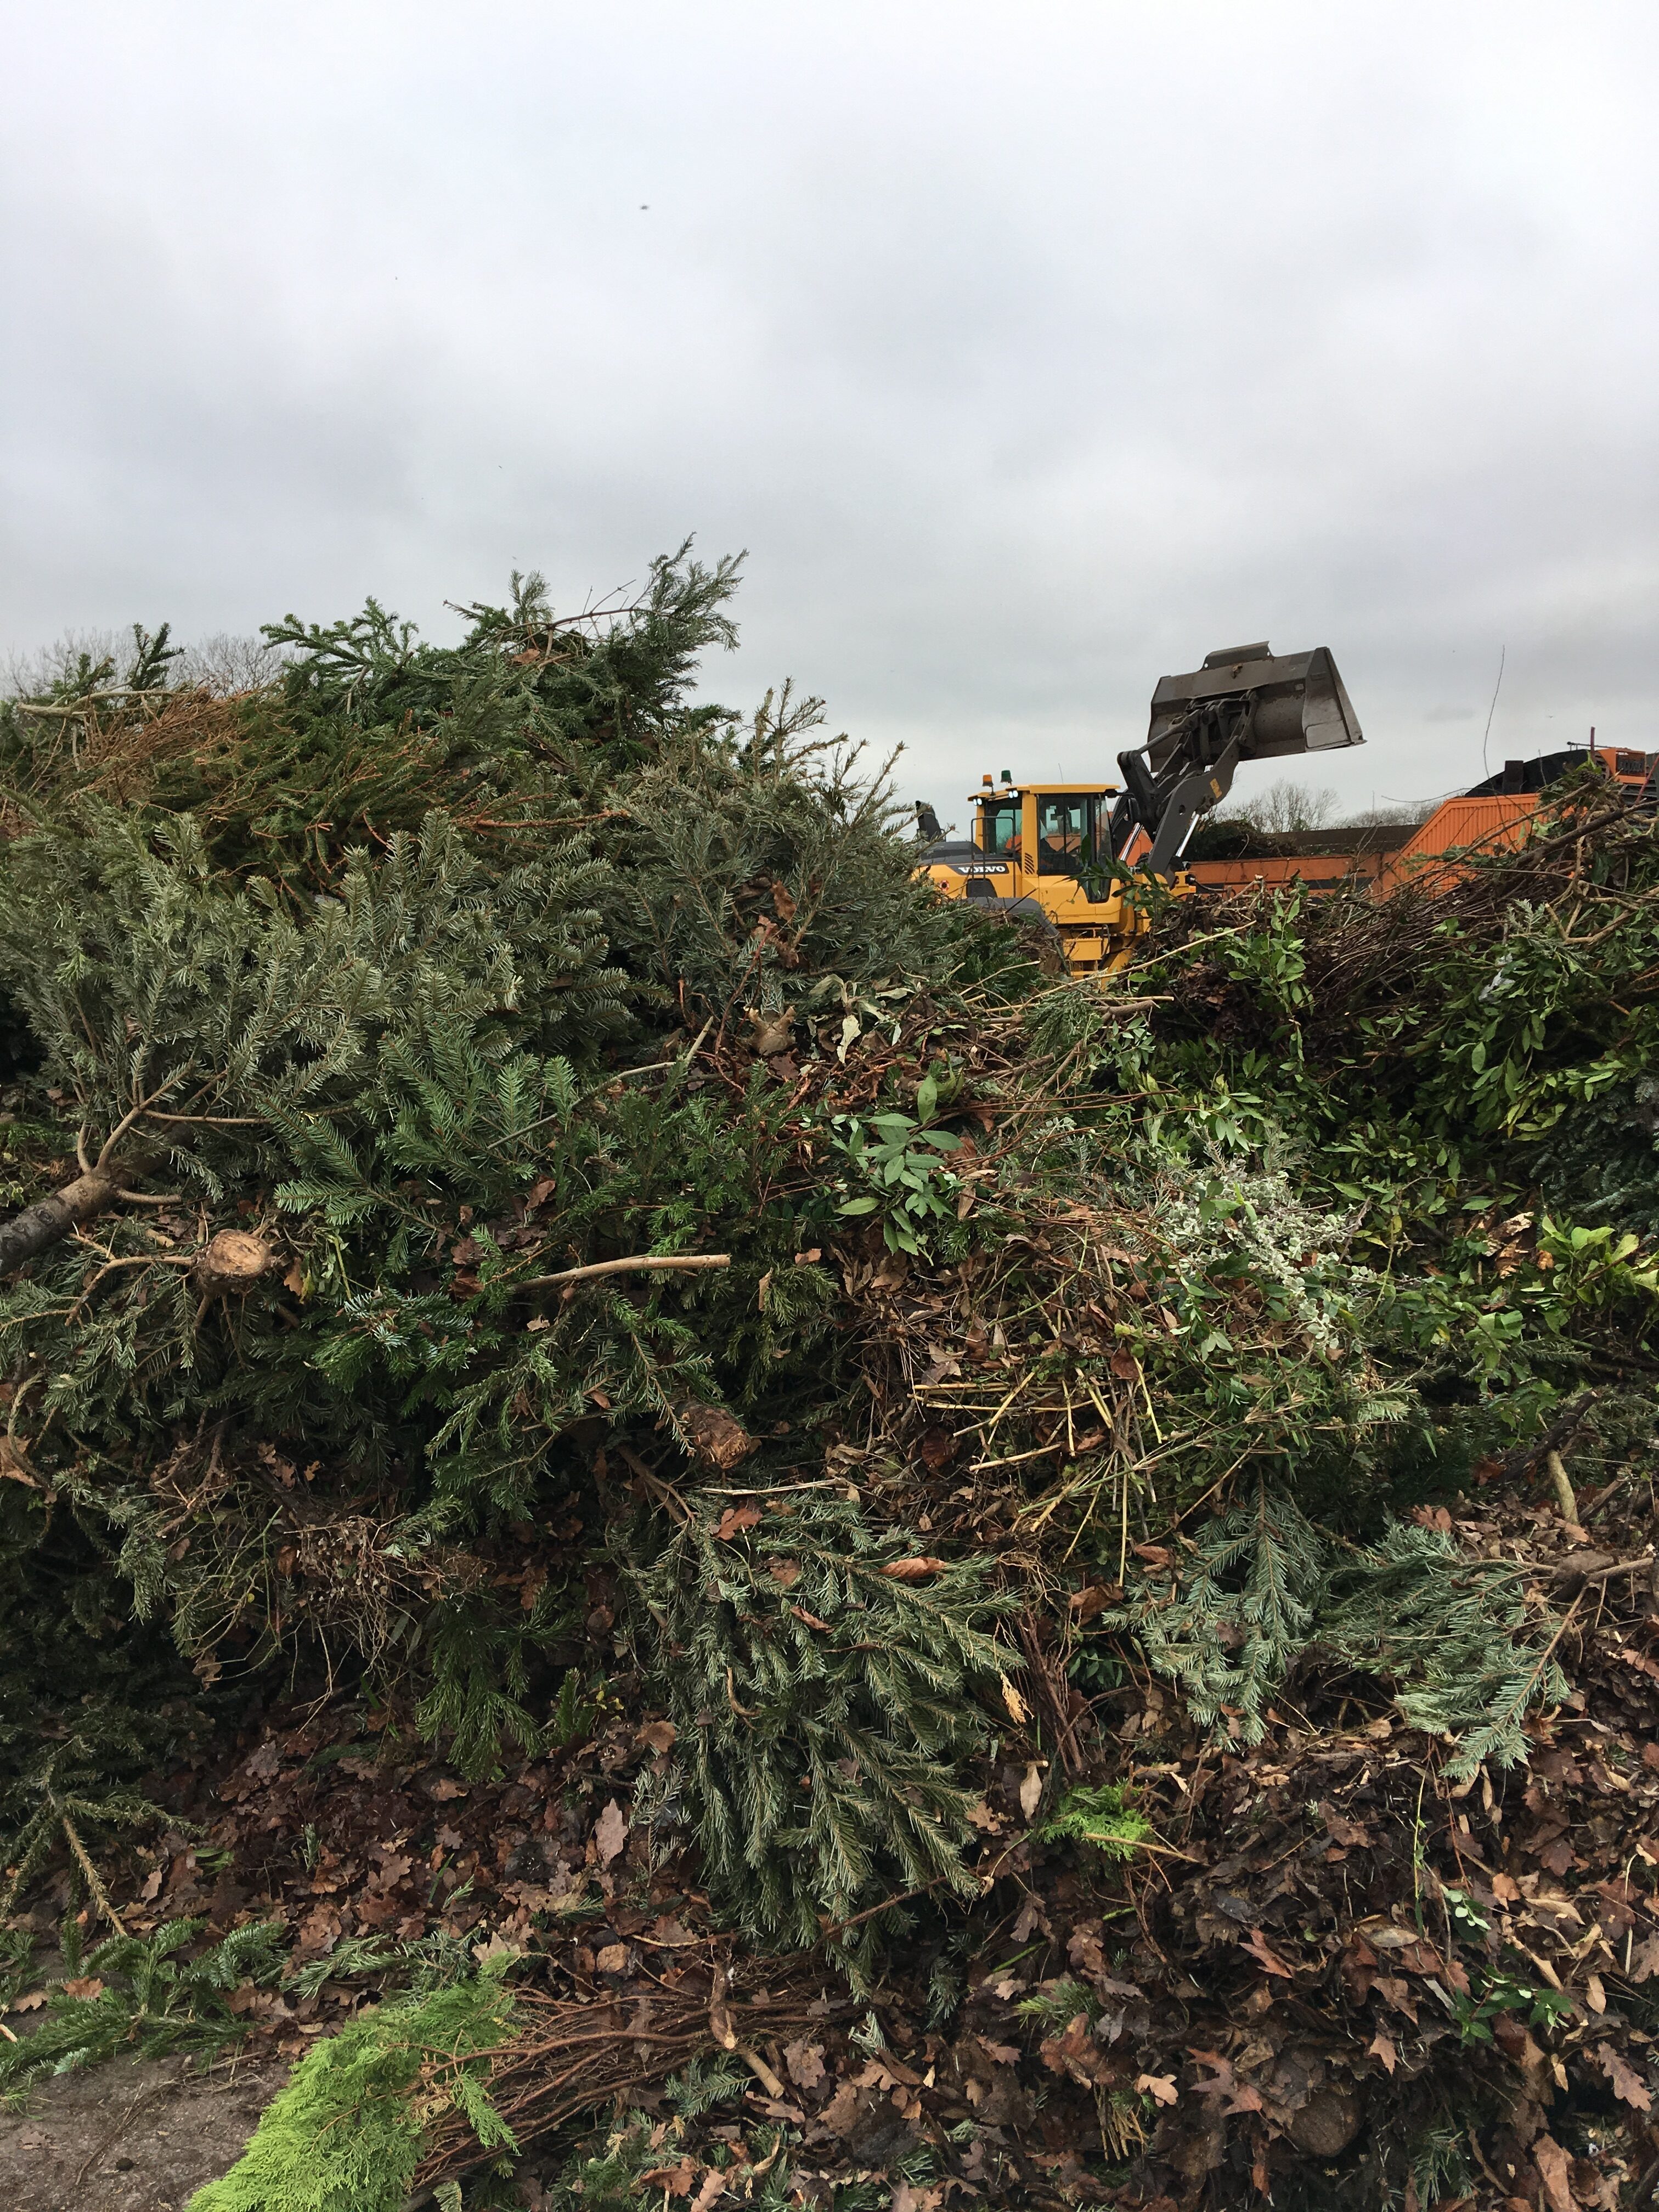 Severn Trent Green Power set to recycle Oxfordshire’s Christmas trees